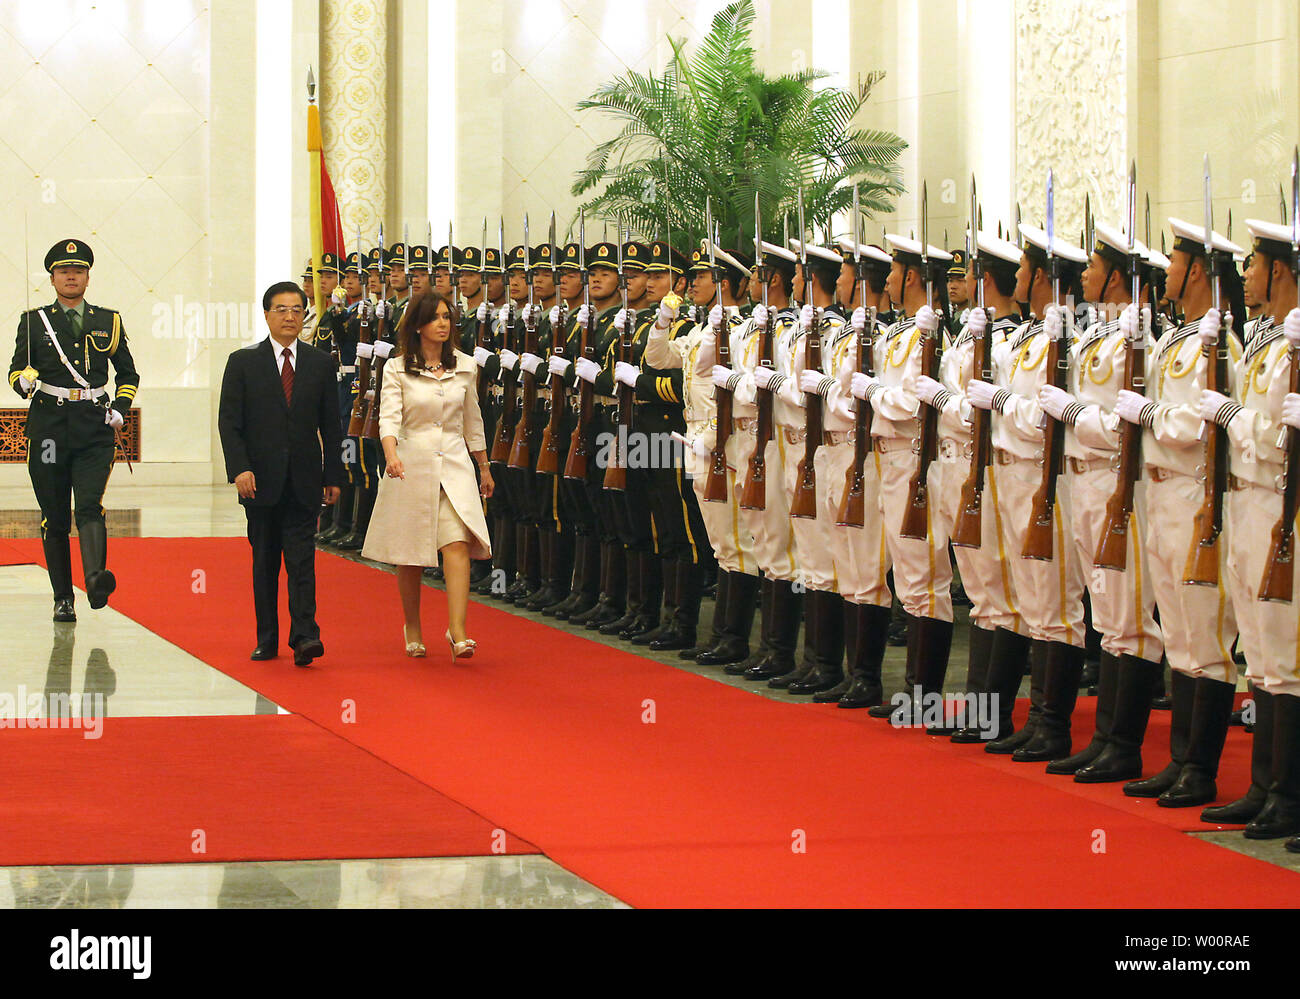 Argentina's President Cristina Kirchner de Fernandez (R)) is escorted by Chinese President Hu Jintao during a welcoming ceremony at the Great Hall of the People in Beijing on July 13, 2010.  China and Argentina agreed on contracts for railway projects in the South American country totaling 10 billion dollars.    UPI/Stephen Shaver Stock Photo